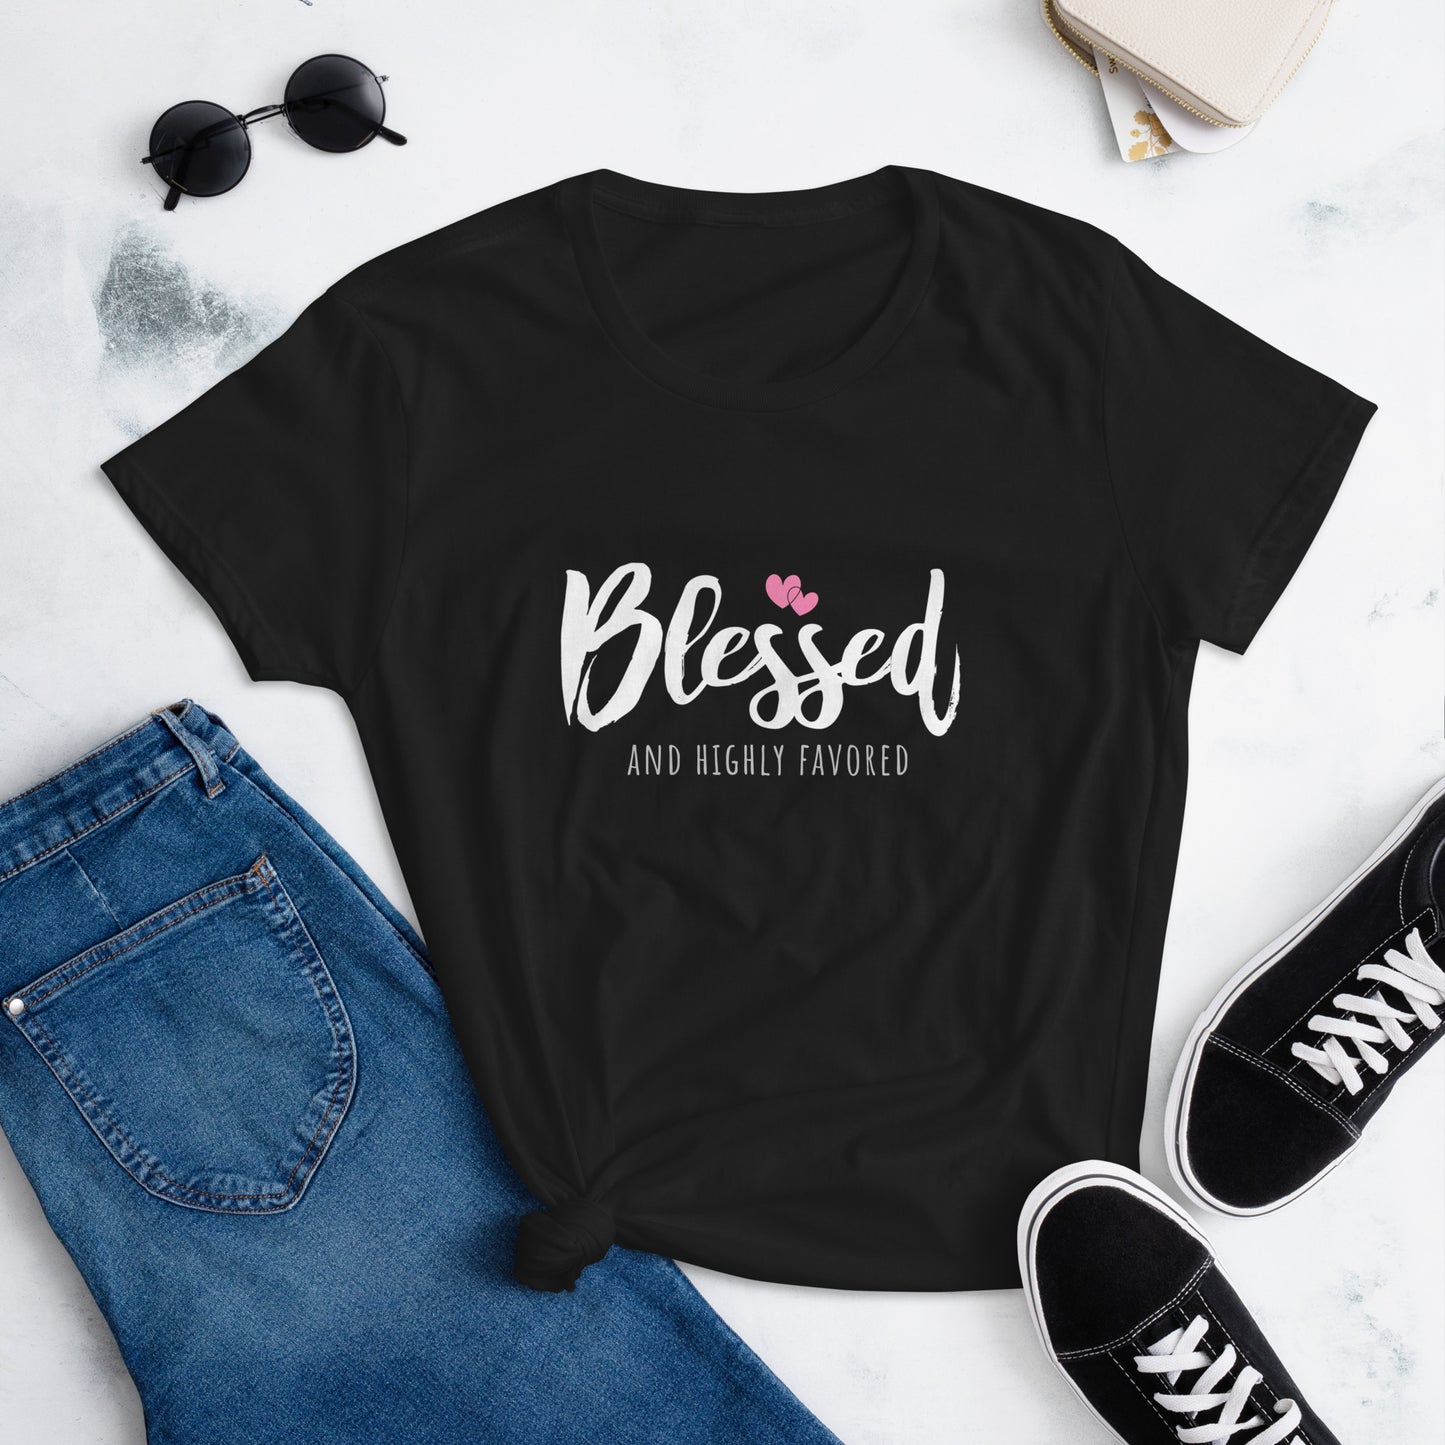 Blessed and Highly Favored Women's Fashion Fit T-shirt